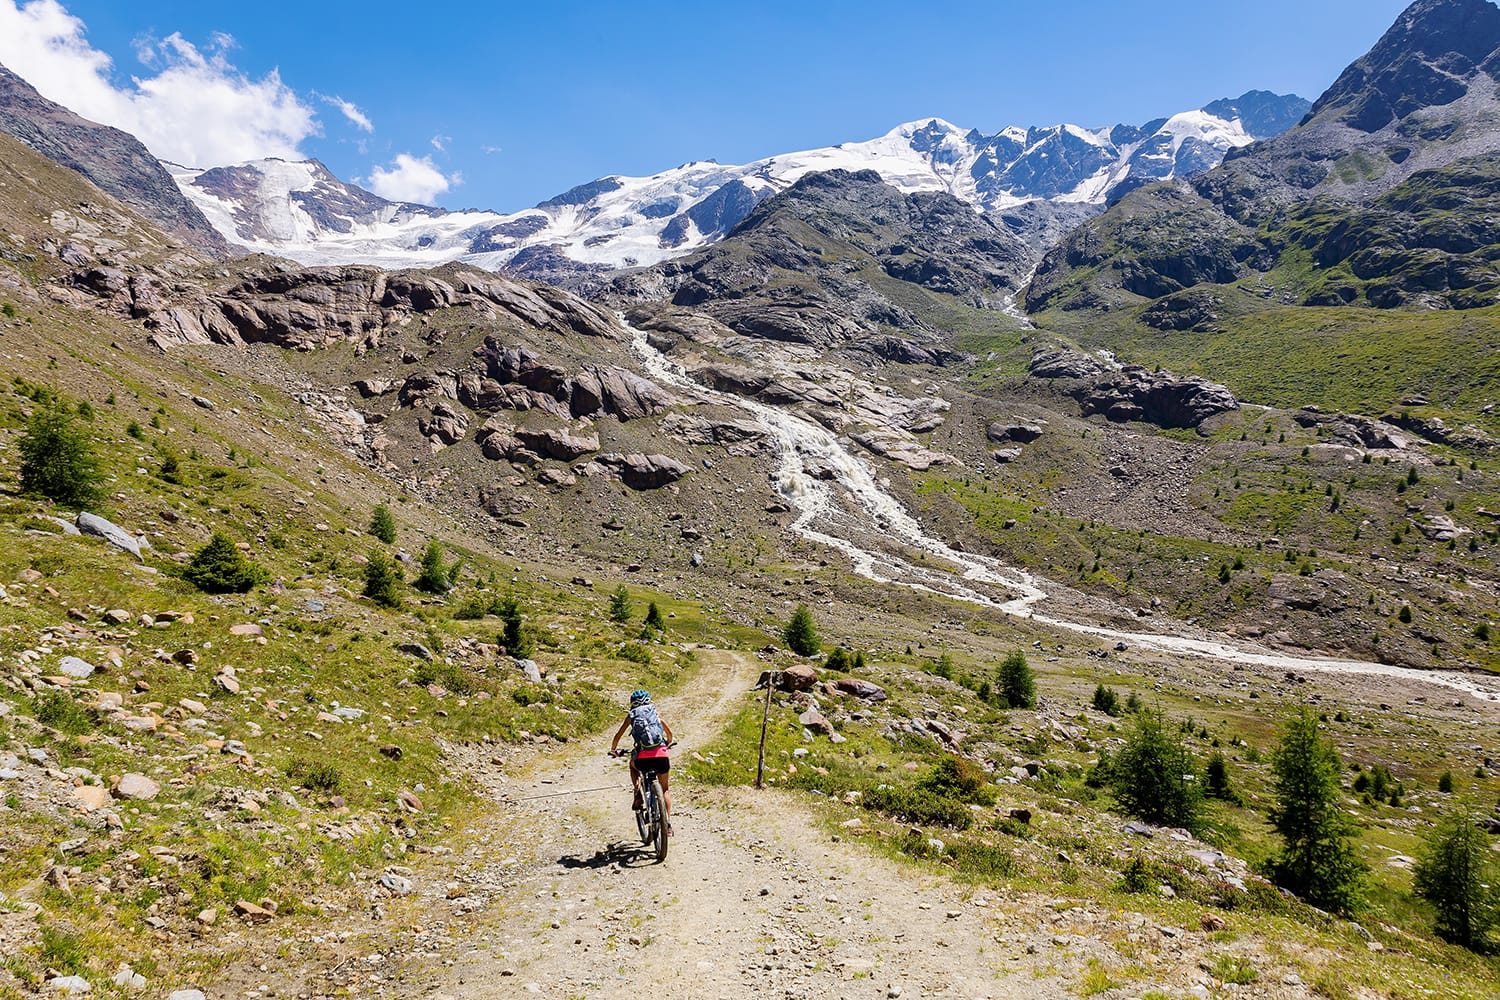 MTB excursion in the valley of Forni in the Stelvio National Park, in the background the Forni glacier